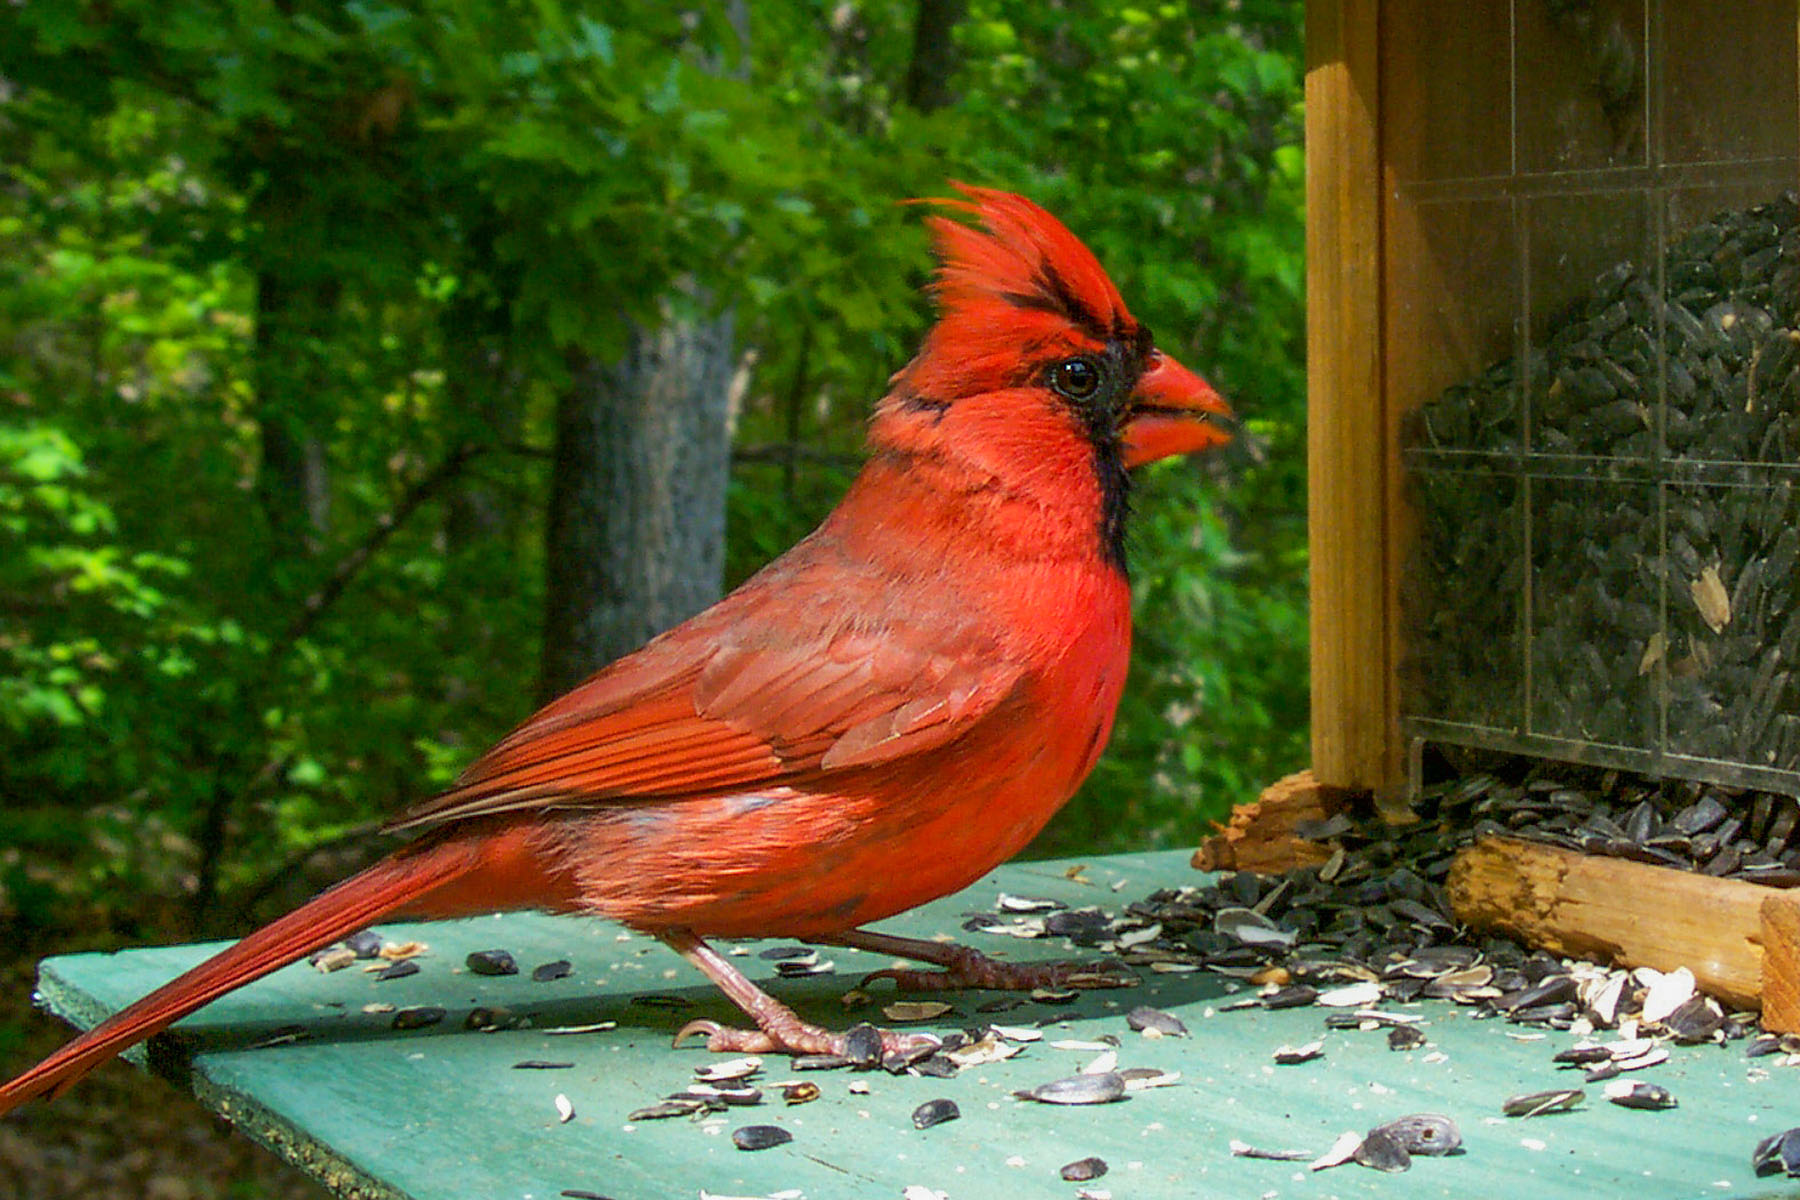 One of my first tethered efforts with the old Kodak DC290, cardinal in my back yard.  Click for next photo.